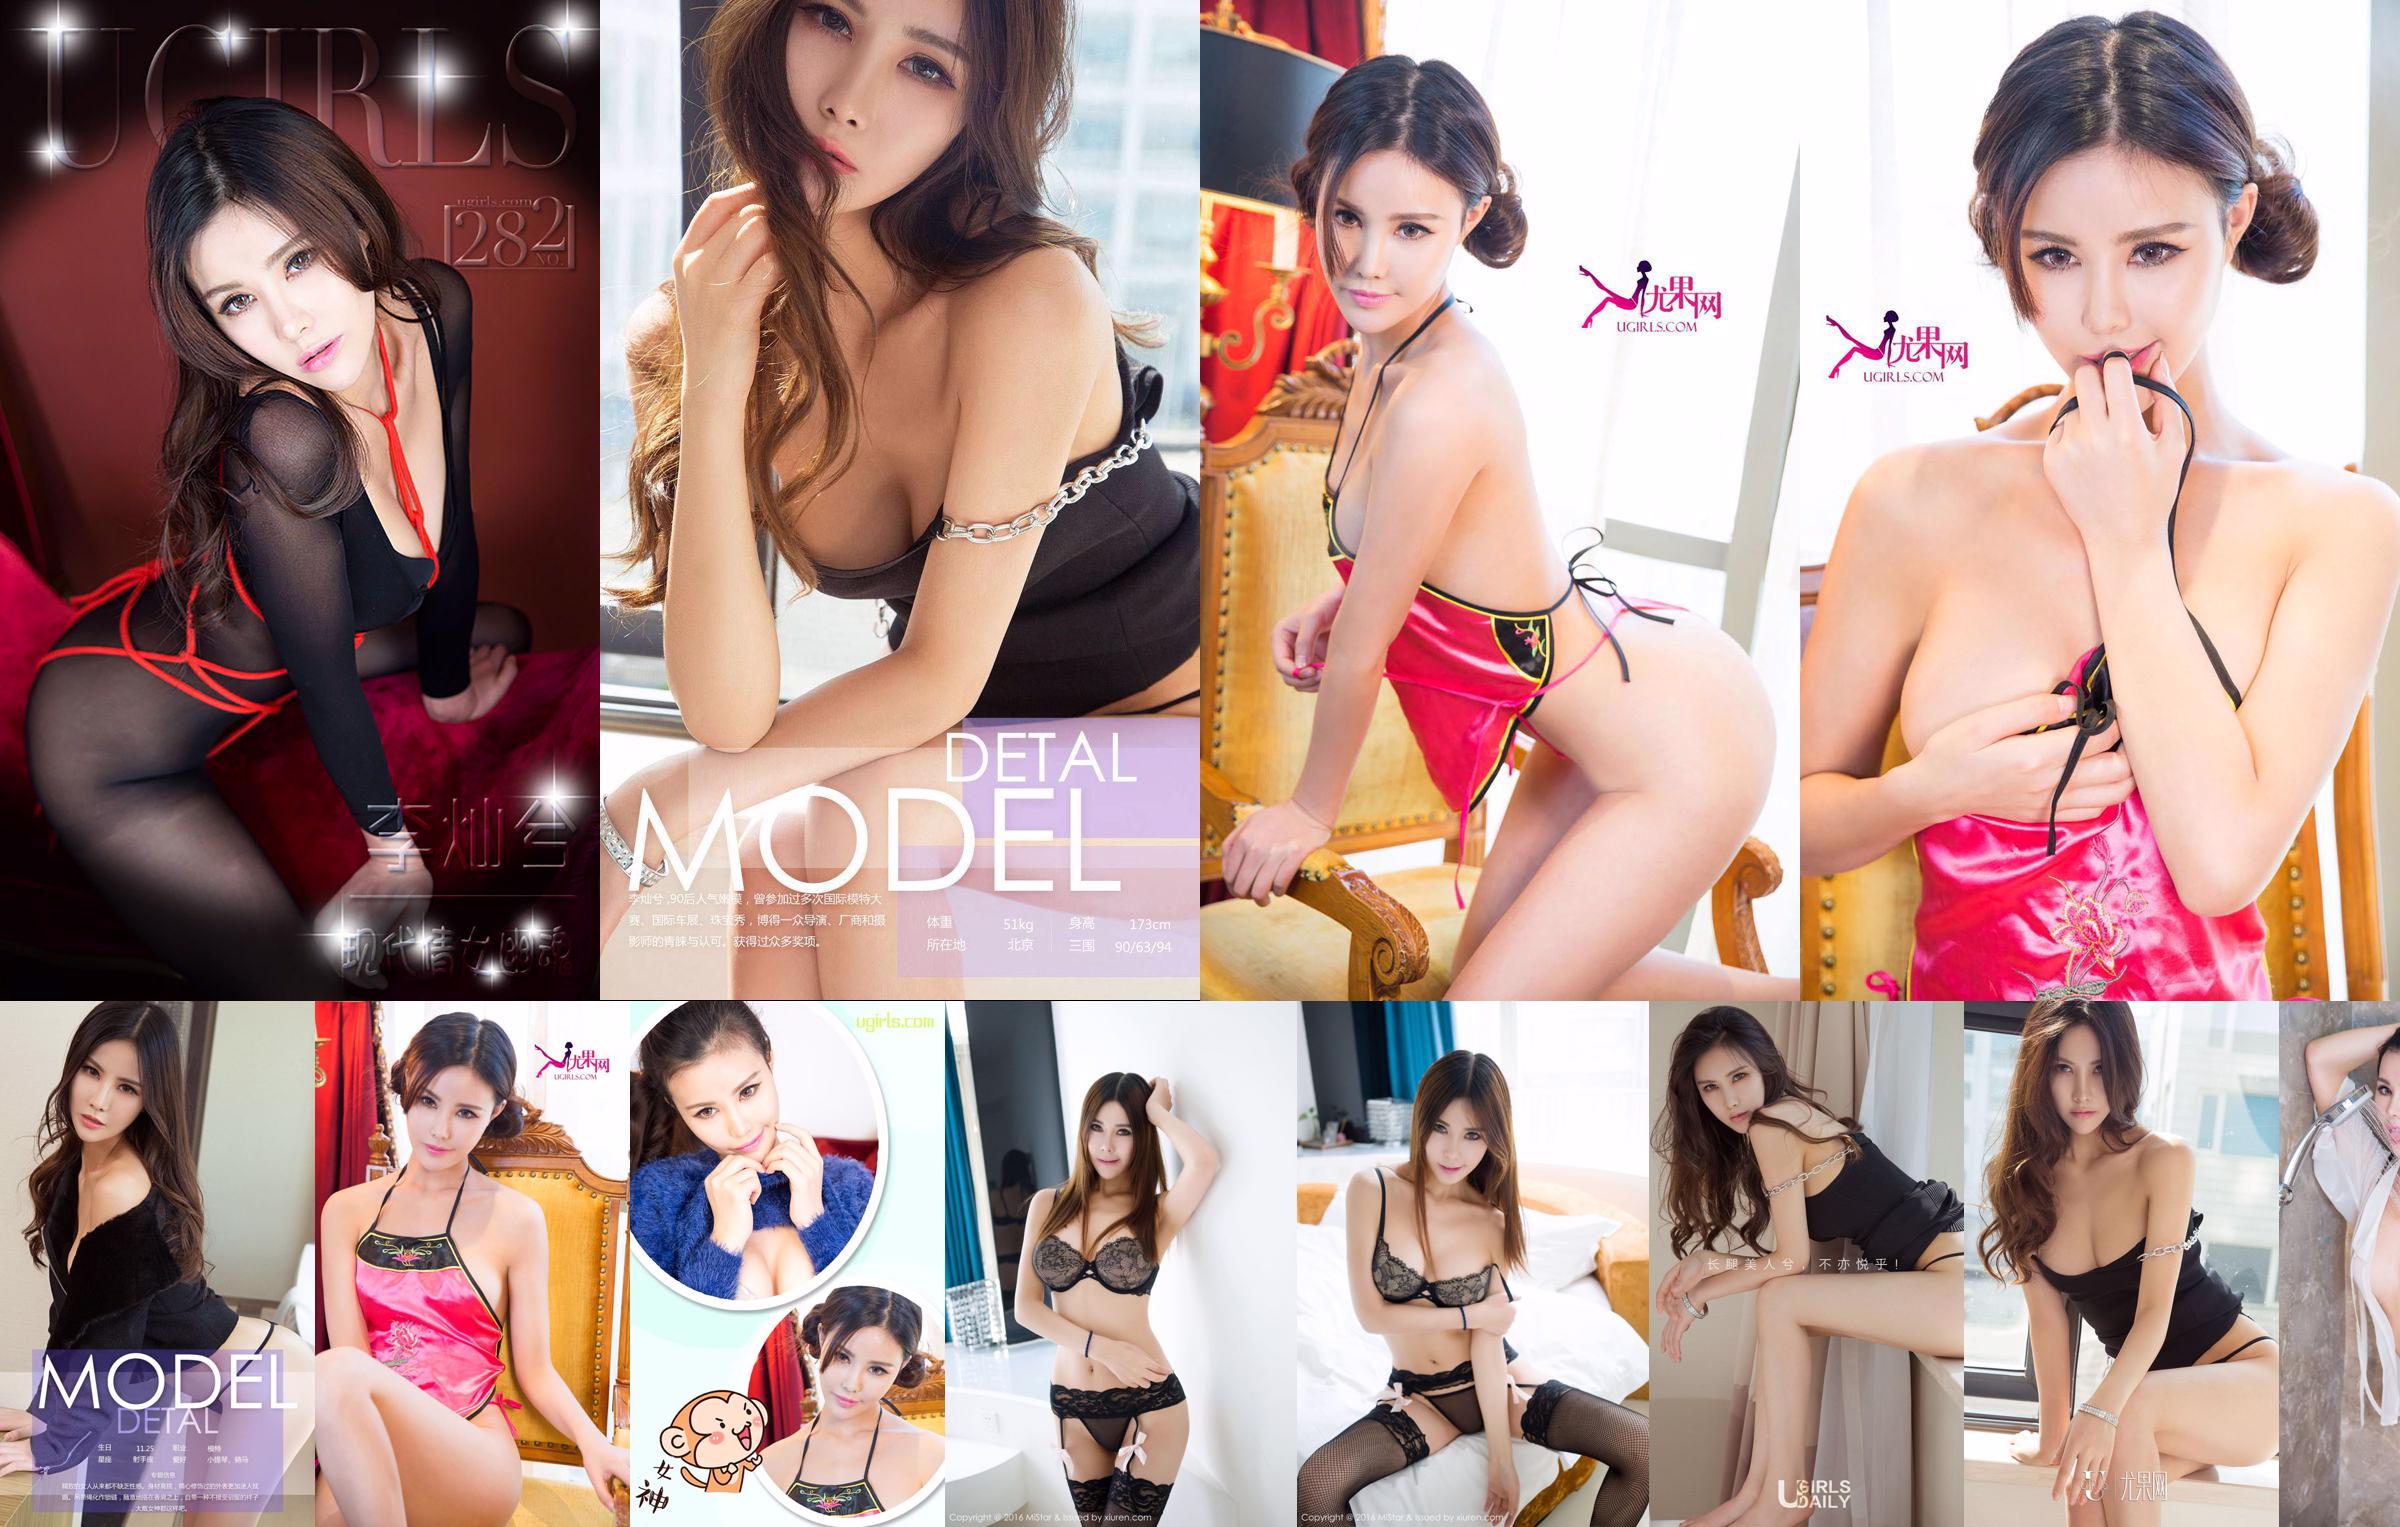 Canxi/Li Canxi "3 sets of sexy lingerie" [MiStar] Vol.097 No.eef5c7 Page 3